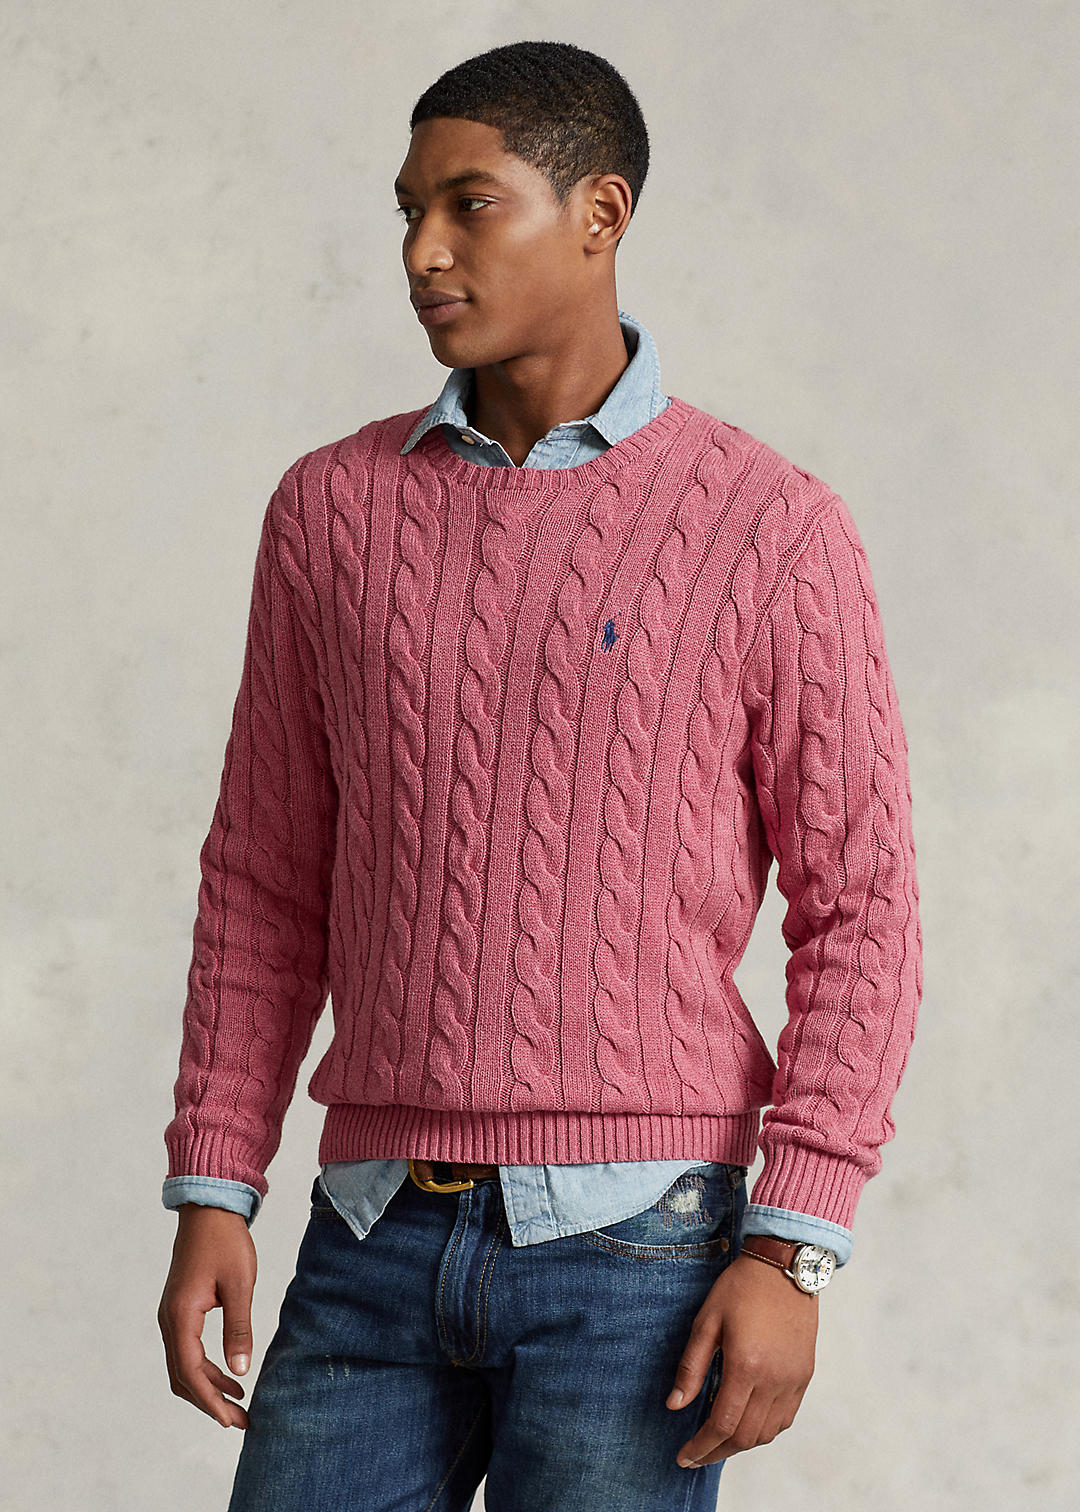 Polo Ralph Lauren cable knit sweater 